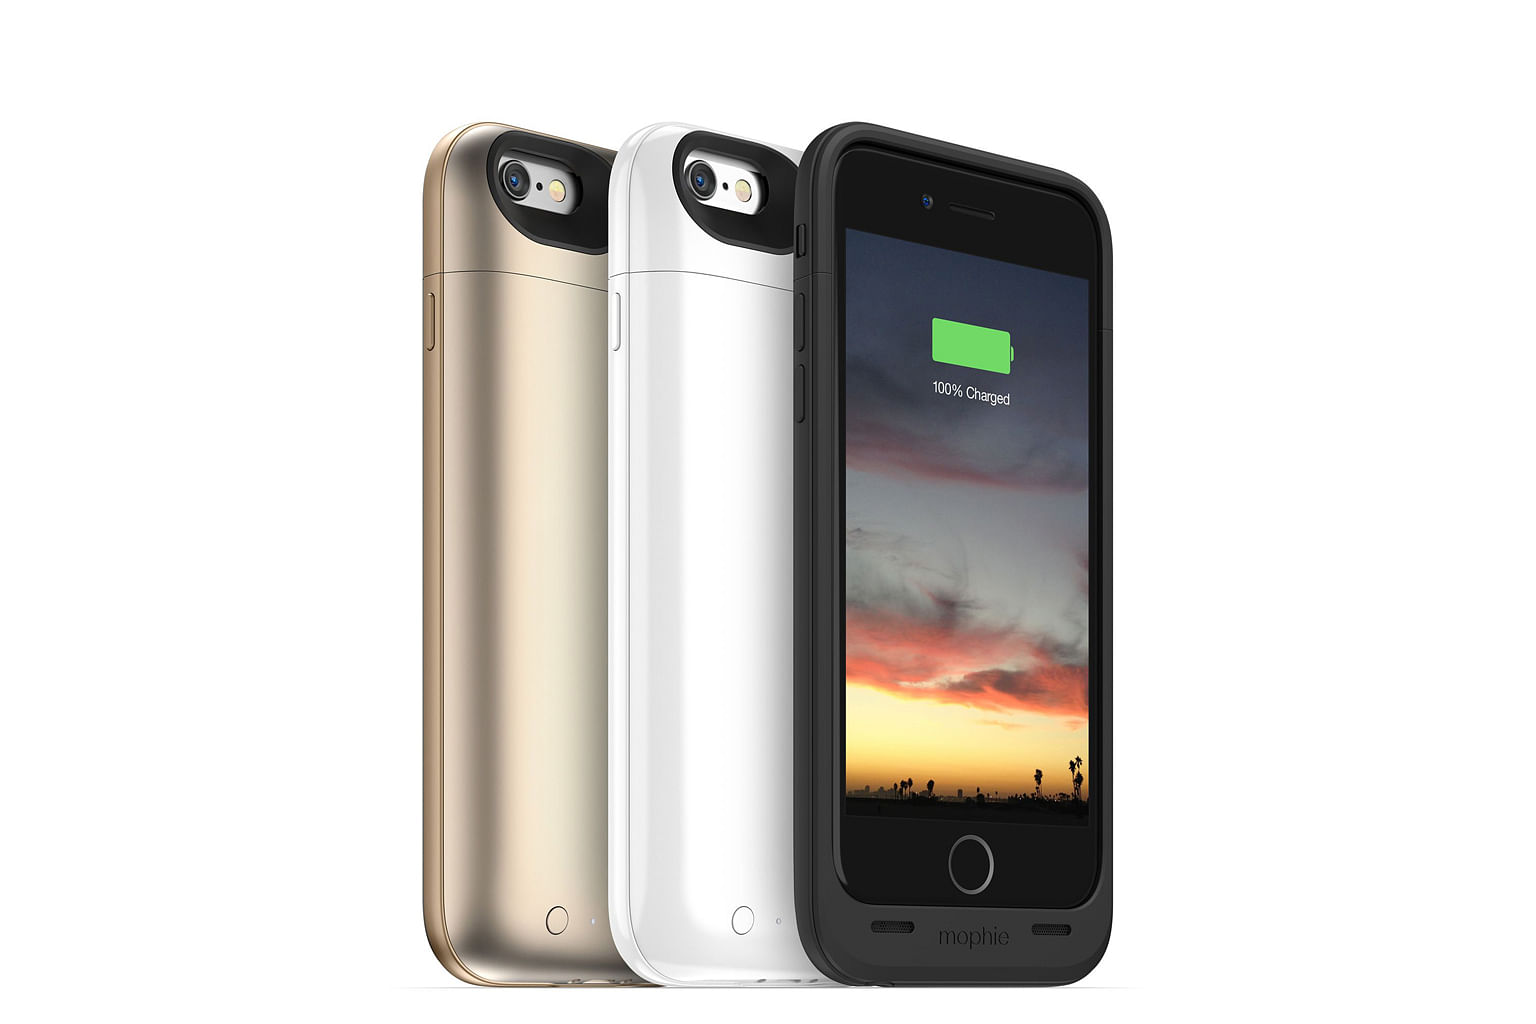 Of the four cases, the Mophie Juice Pack for iPhone 6 Plus is the thinnest and lightest. It is only 14.5mm thick and weighs 111g. You can leave the iPhone in the case when syncing it with a computer.